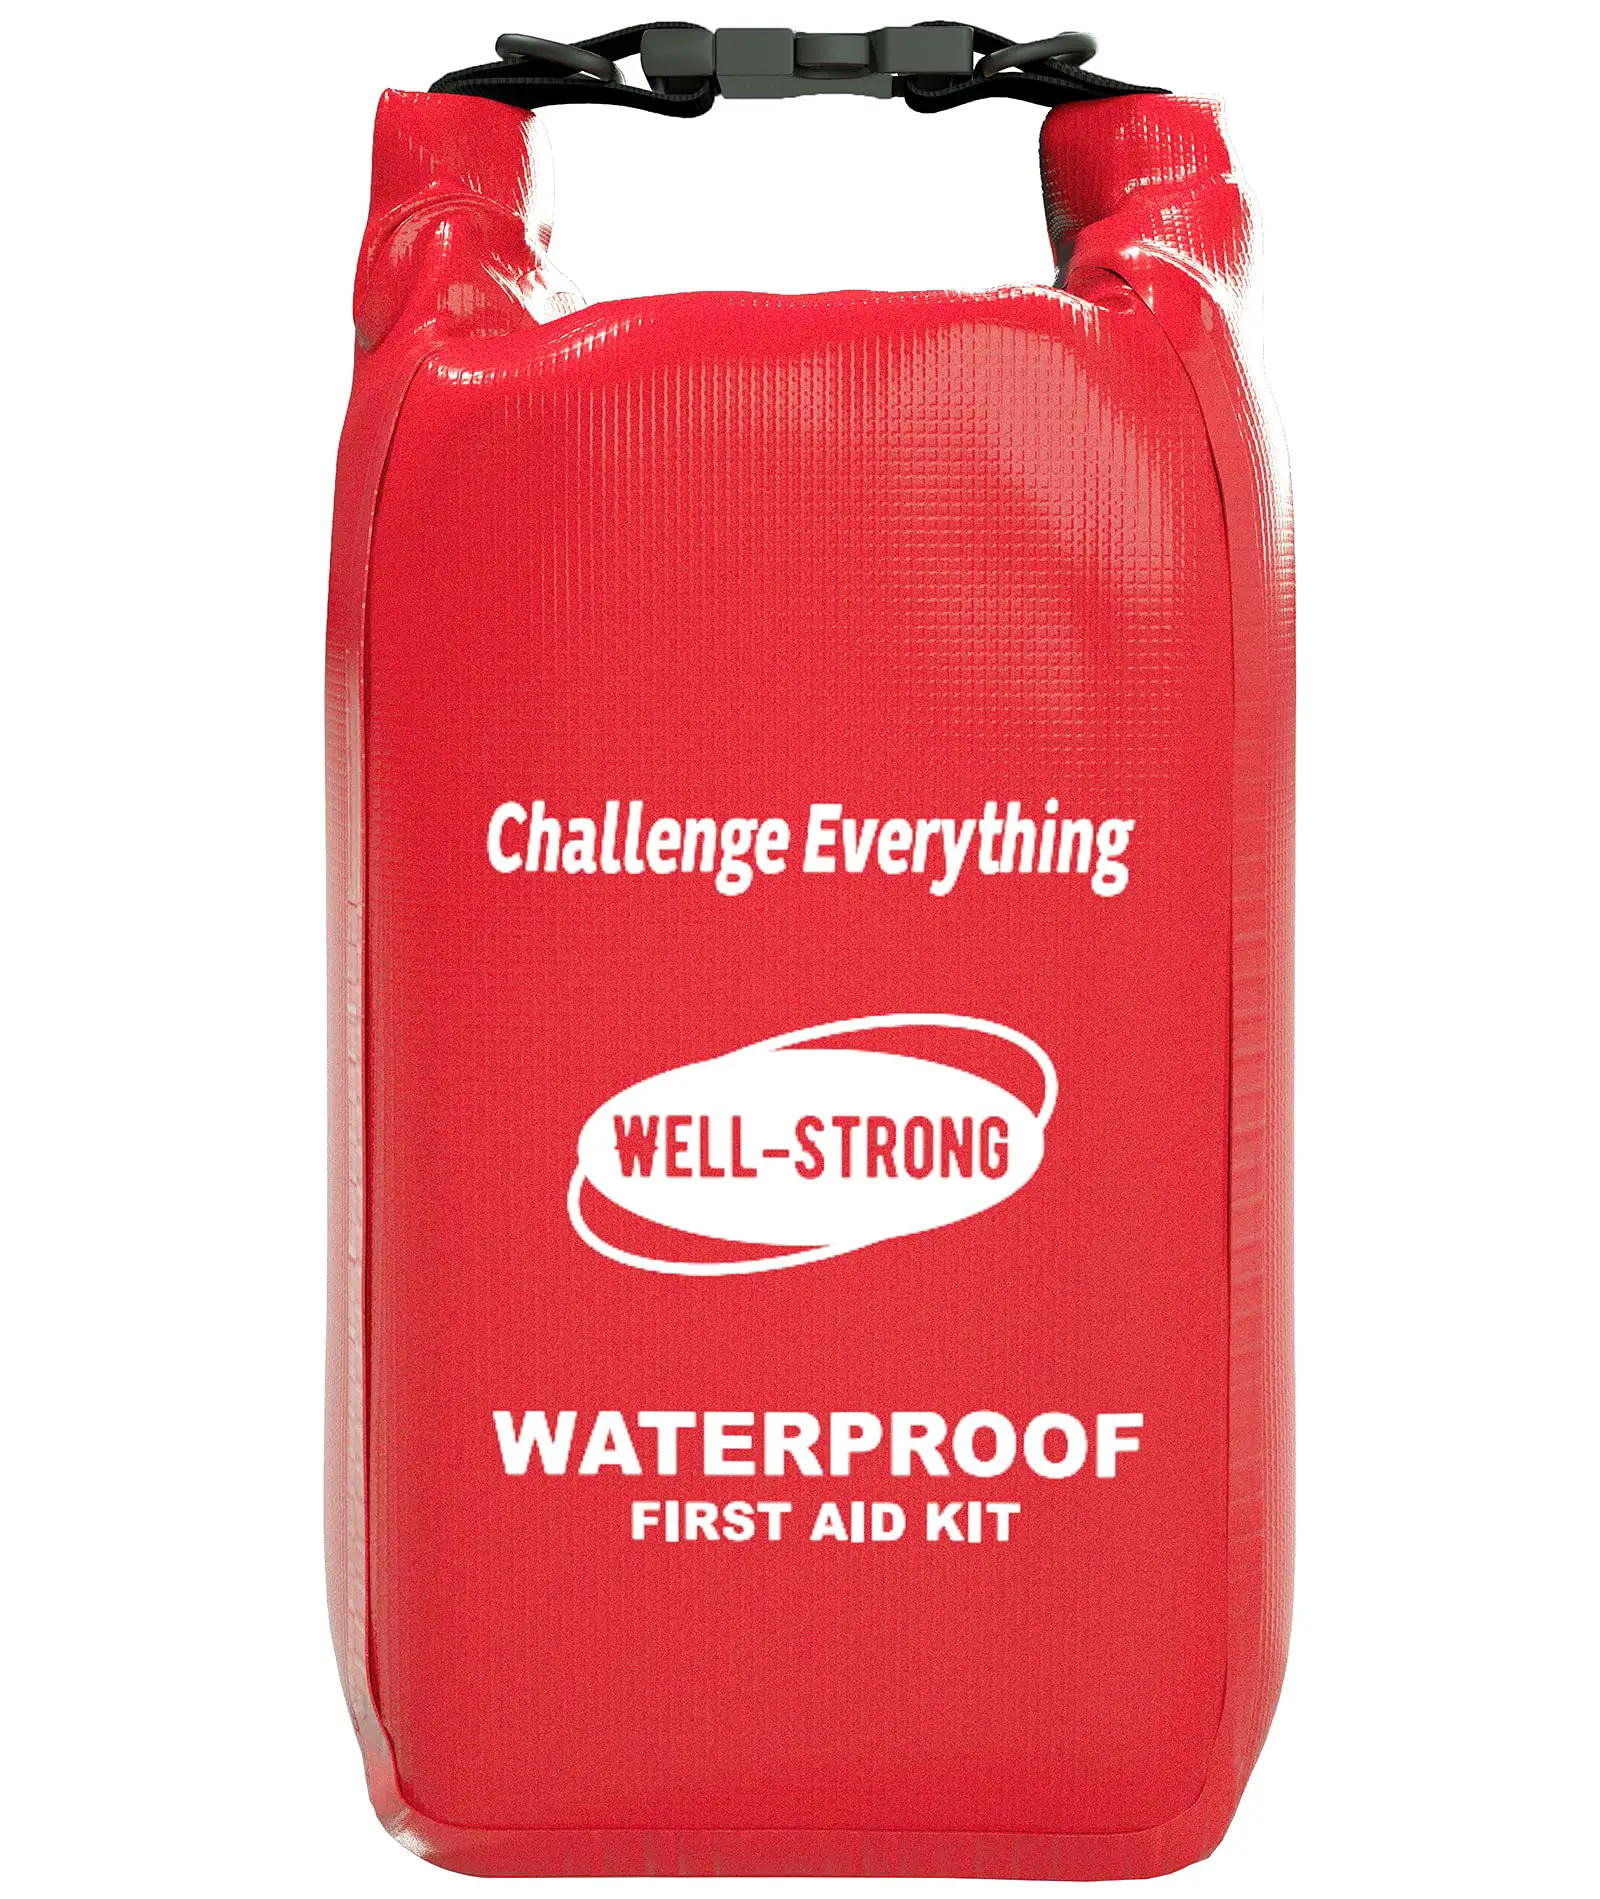 WELL-STRONG Waterproof First Aid Kit